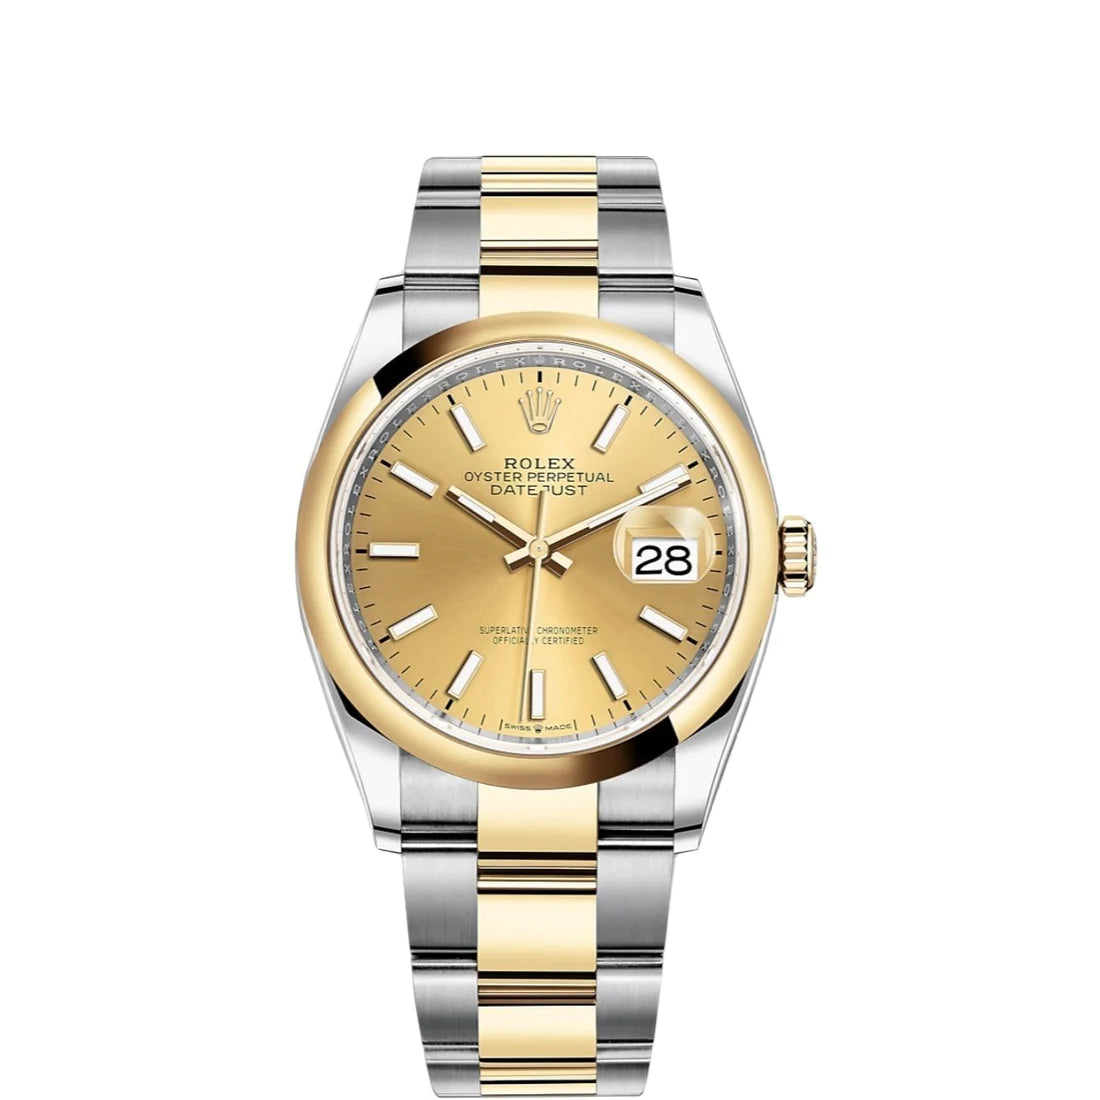 Rolex Datejust 36mm 2 Tone 18k Yellow Gold & Stainless Steel Champagne Dial Smooth Gold Bezel Oyster Steel Watch 116203